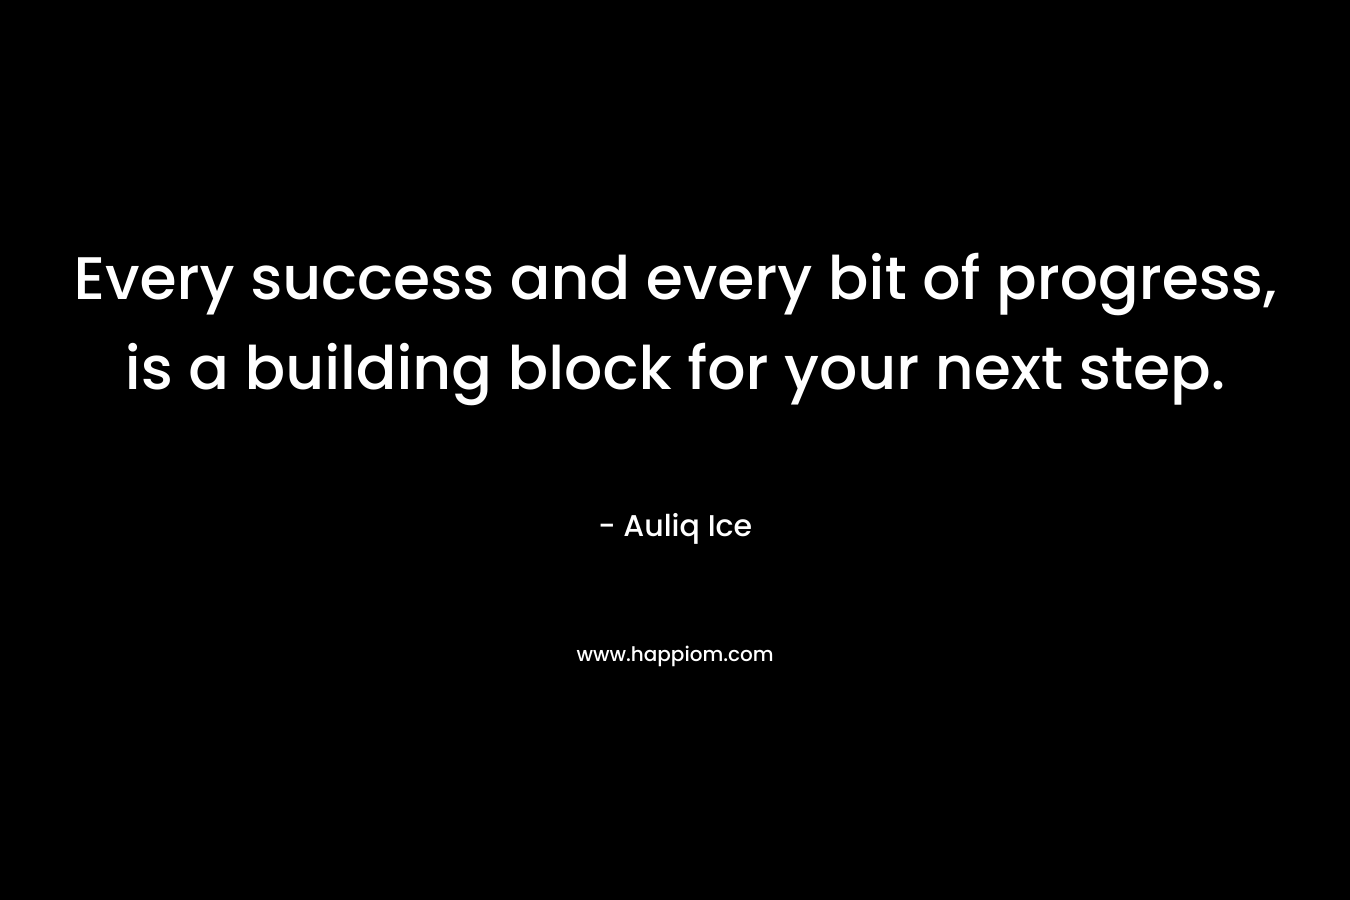 Every success and every bit of progress, is a building block for your next step.